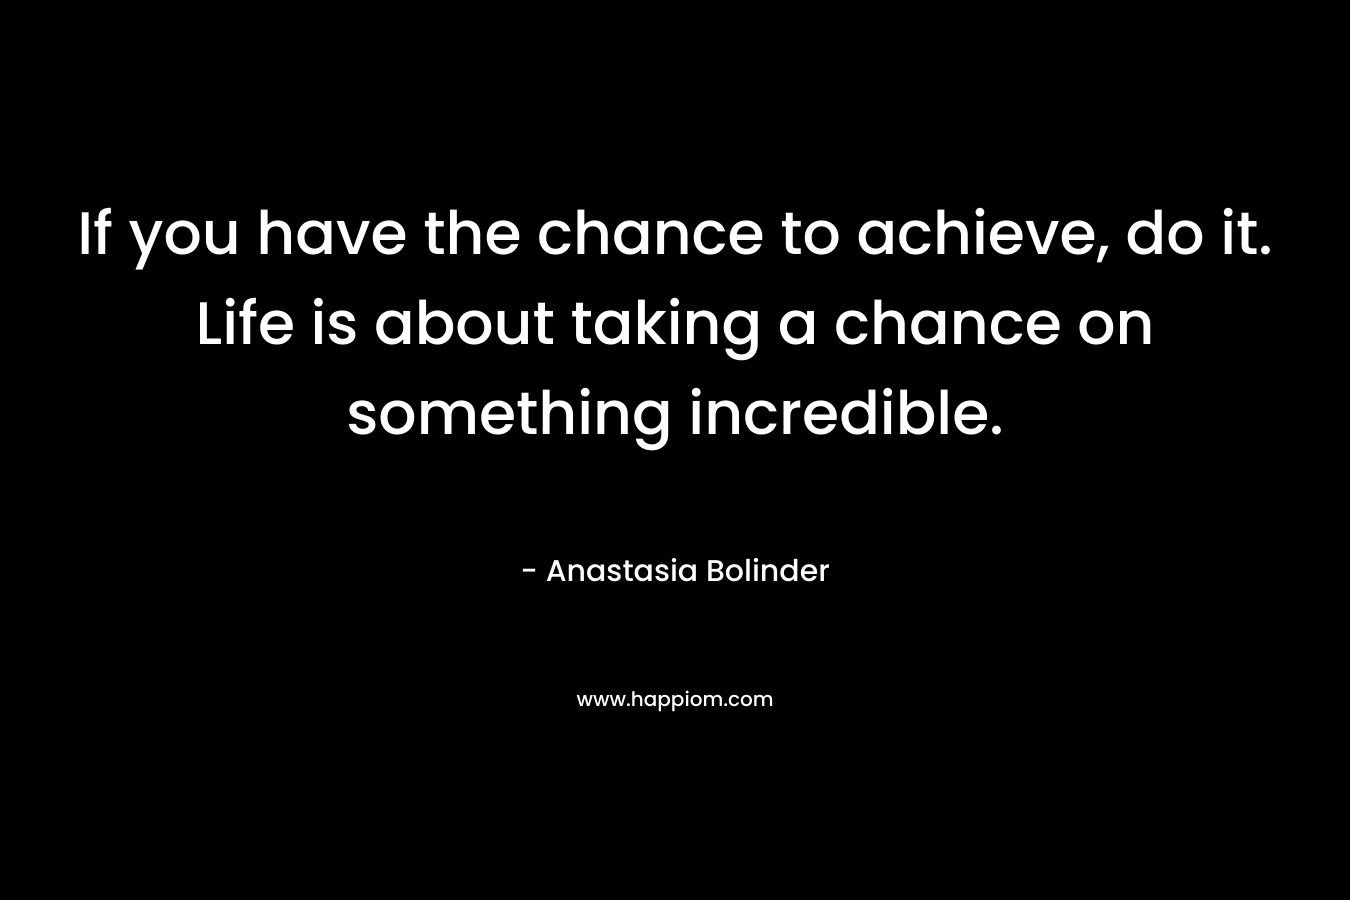 If you have the chance to achieve, do it. Life is about taking a chance on something incredible. – Anastasia Bolinder